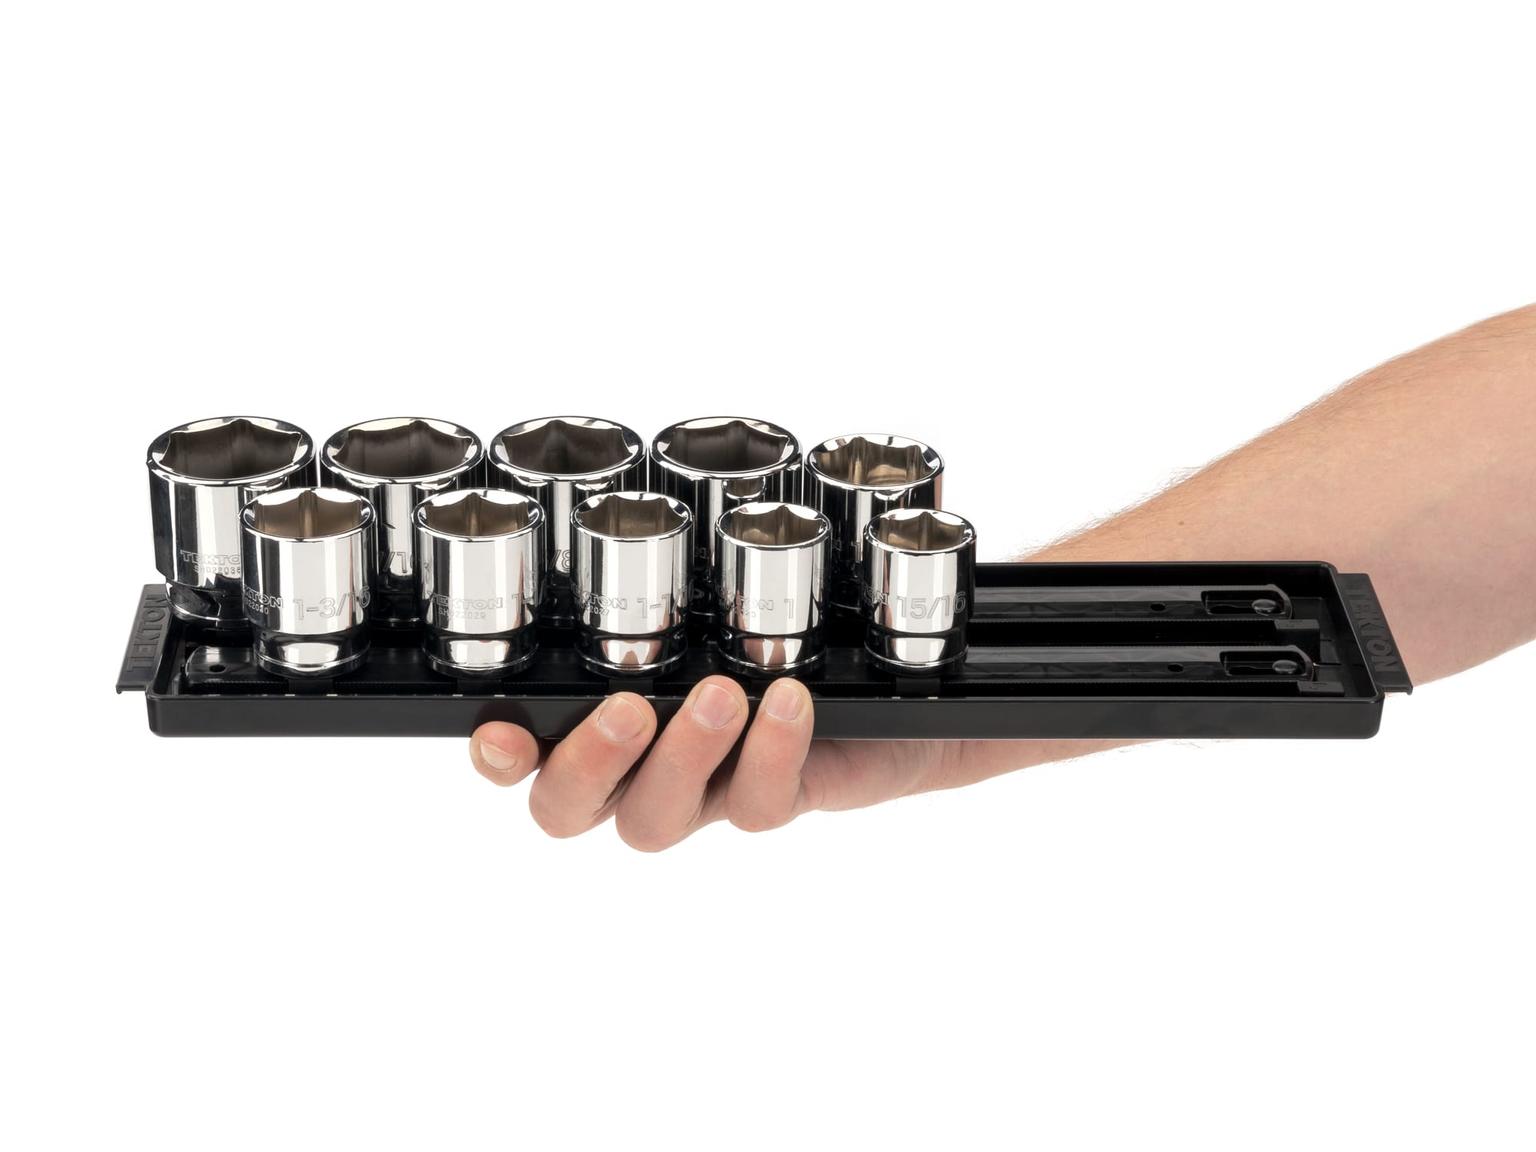 TEKTON SHD92109-T 1/2 Inch Drive 6-Point Socket Set, 10-Piece (15/16 - 1-1/2 in.) with Rails